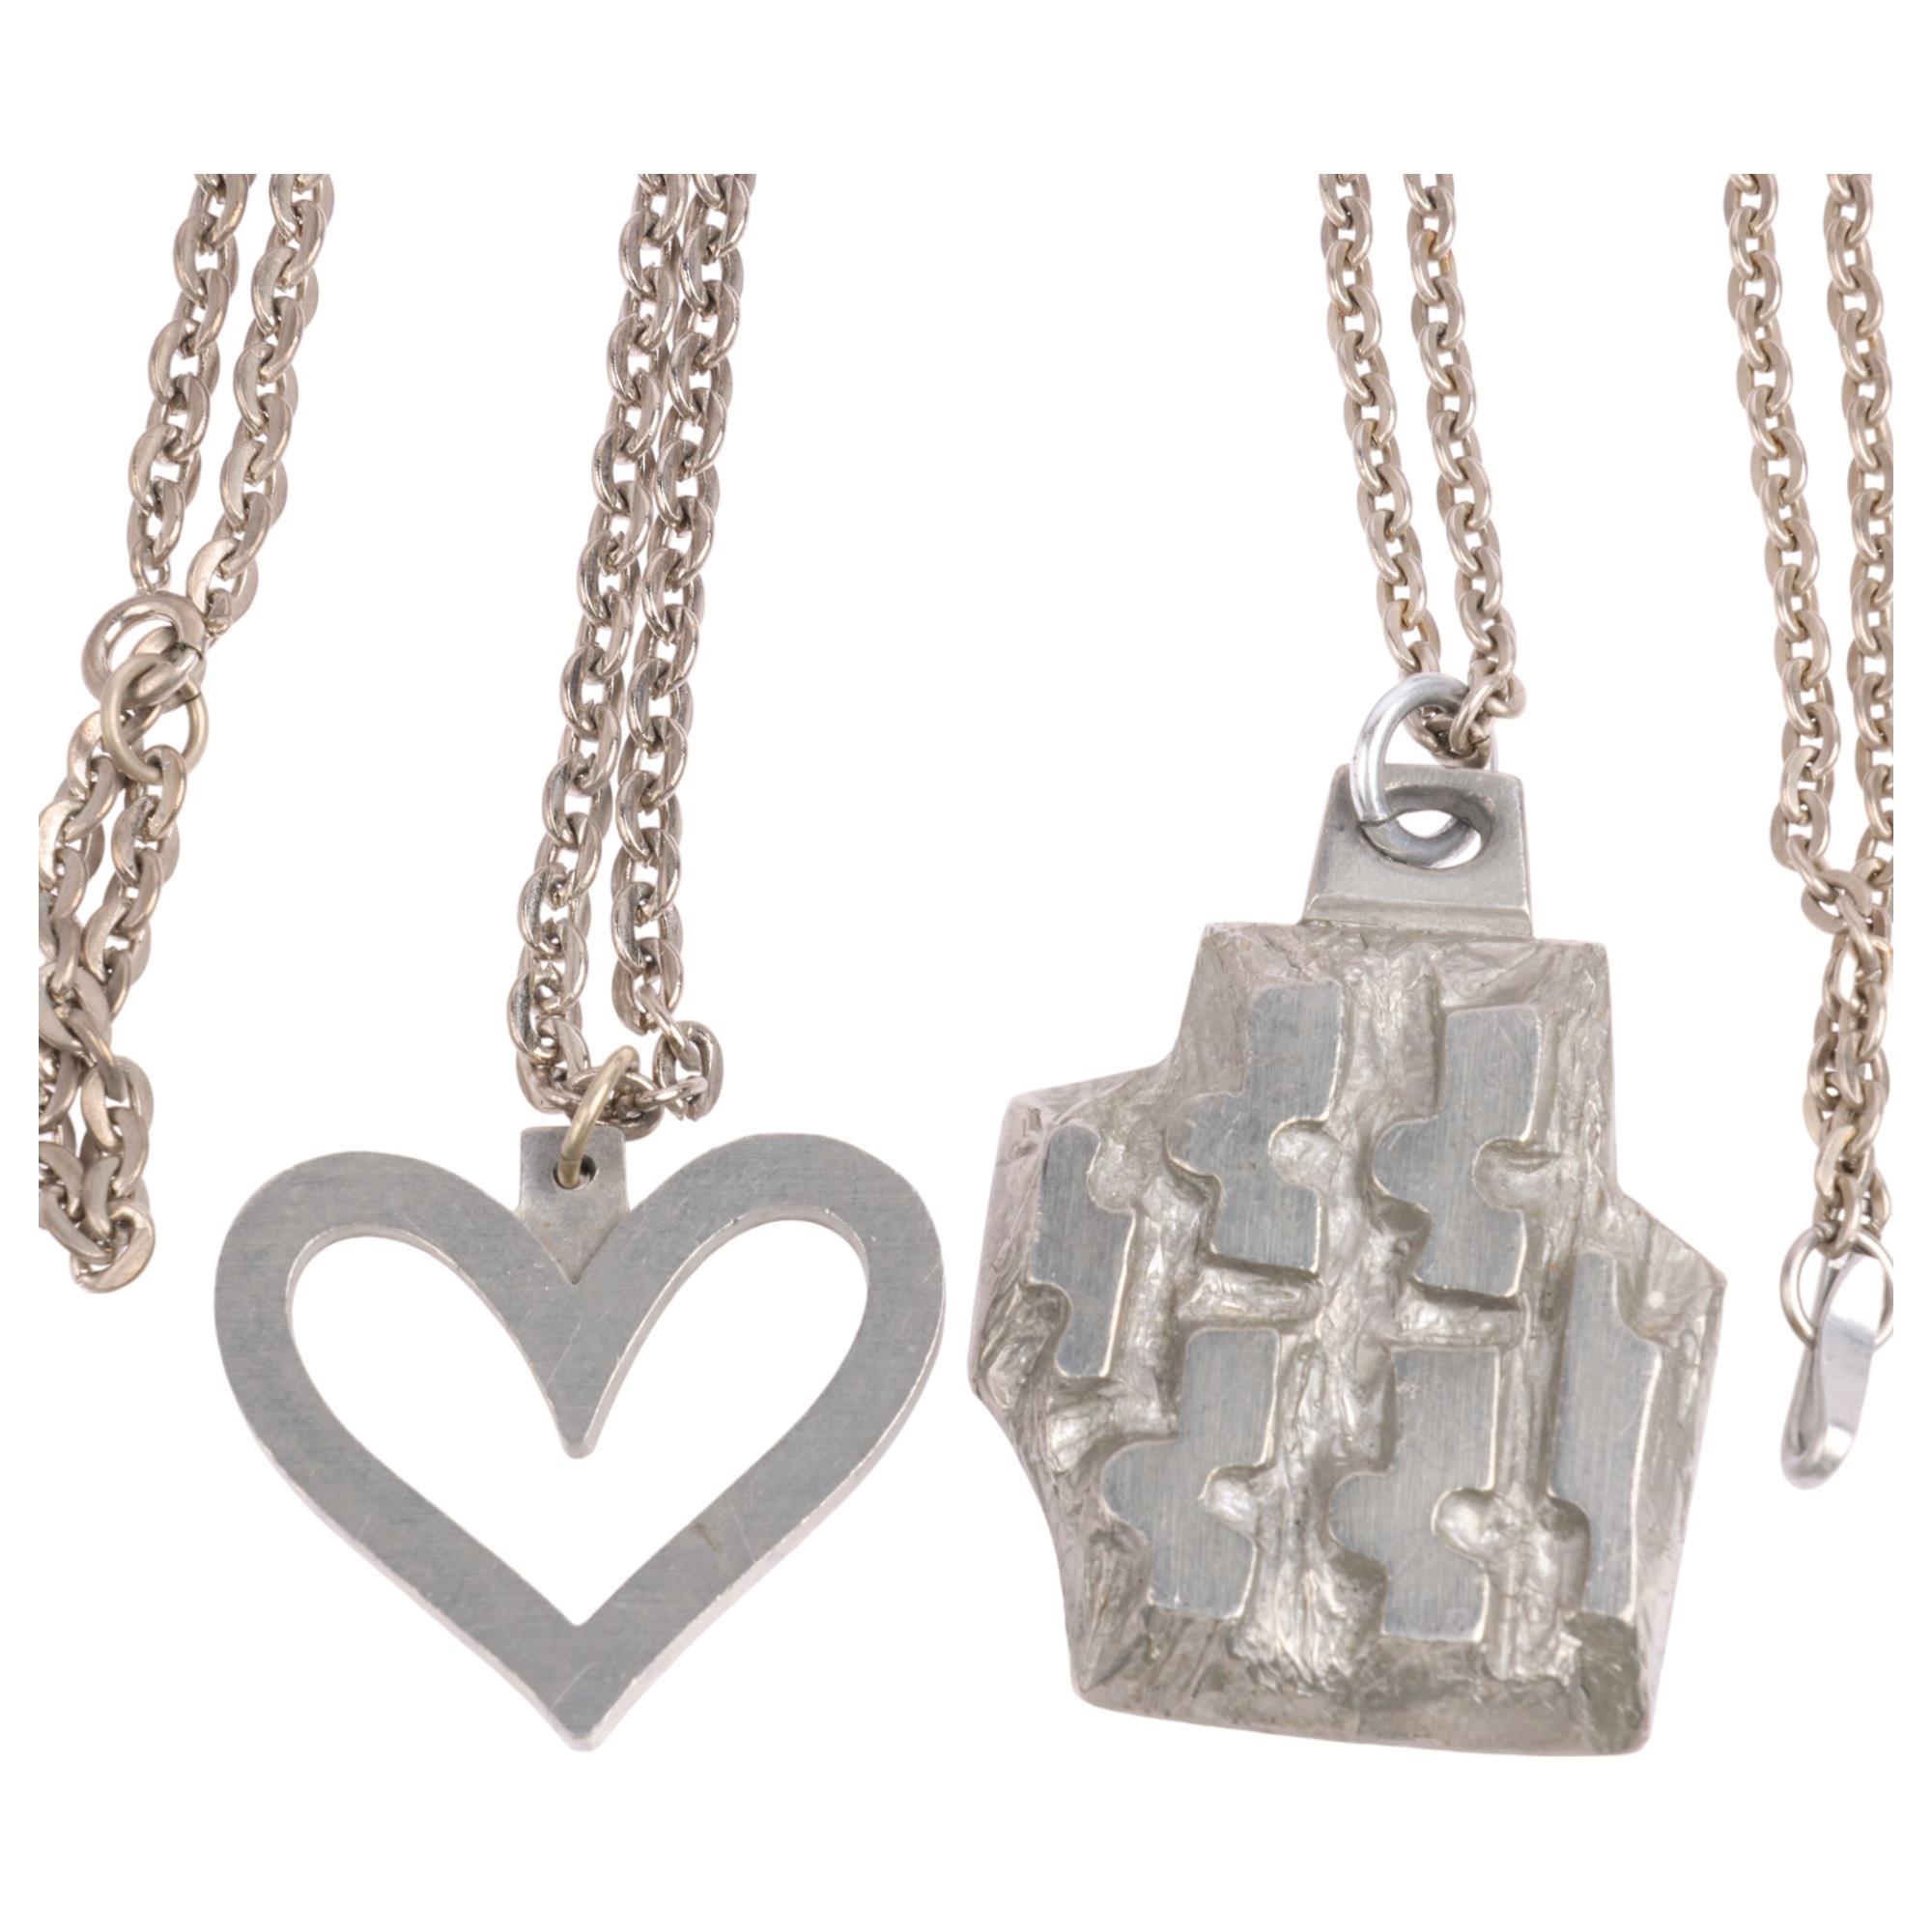 STIGBERT - 2 Swedish brutalist pewter pendant necklaces, including heart example, 39.2mm (2)